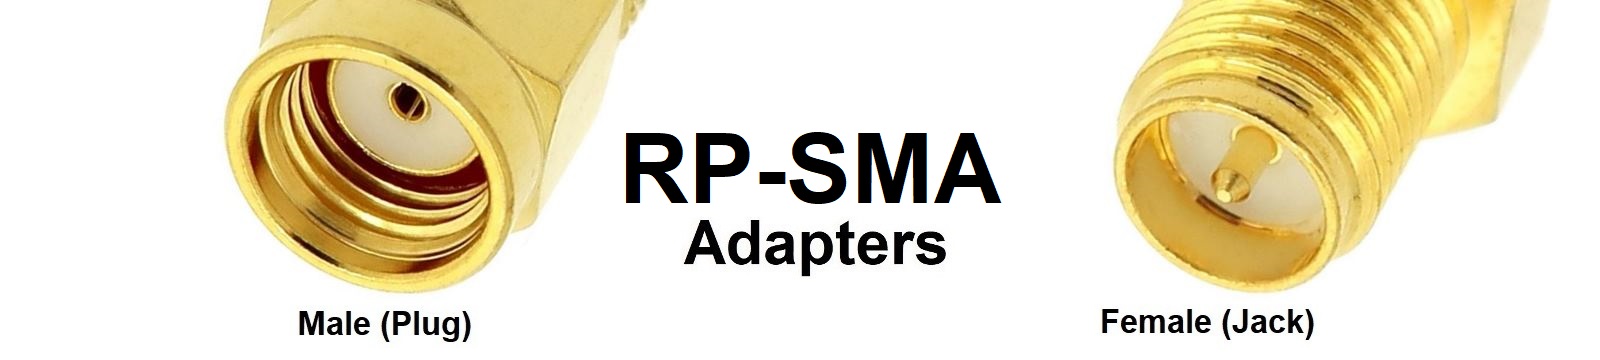 RP-SMA Adapters Category Banner - Max-Gain Systems, Inc.